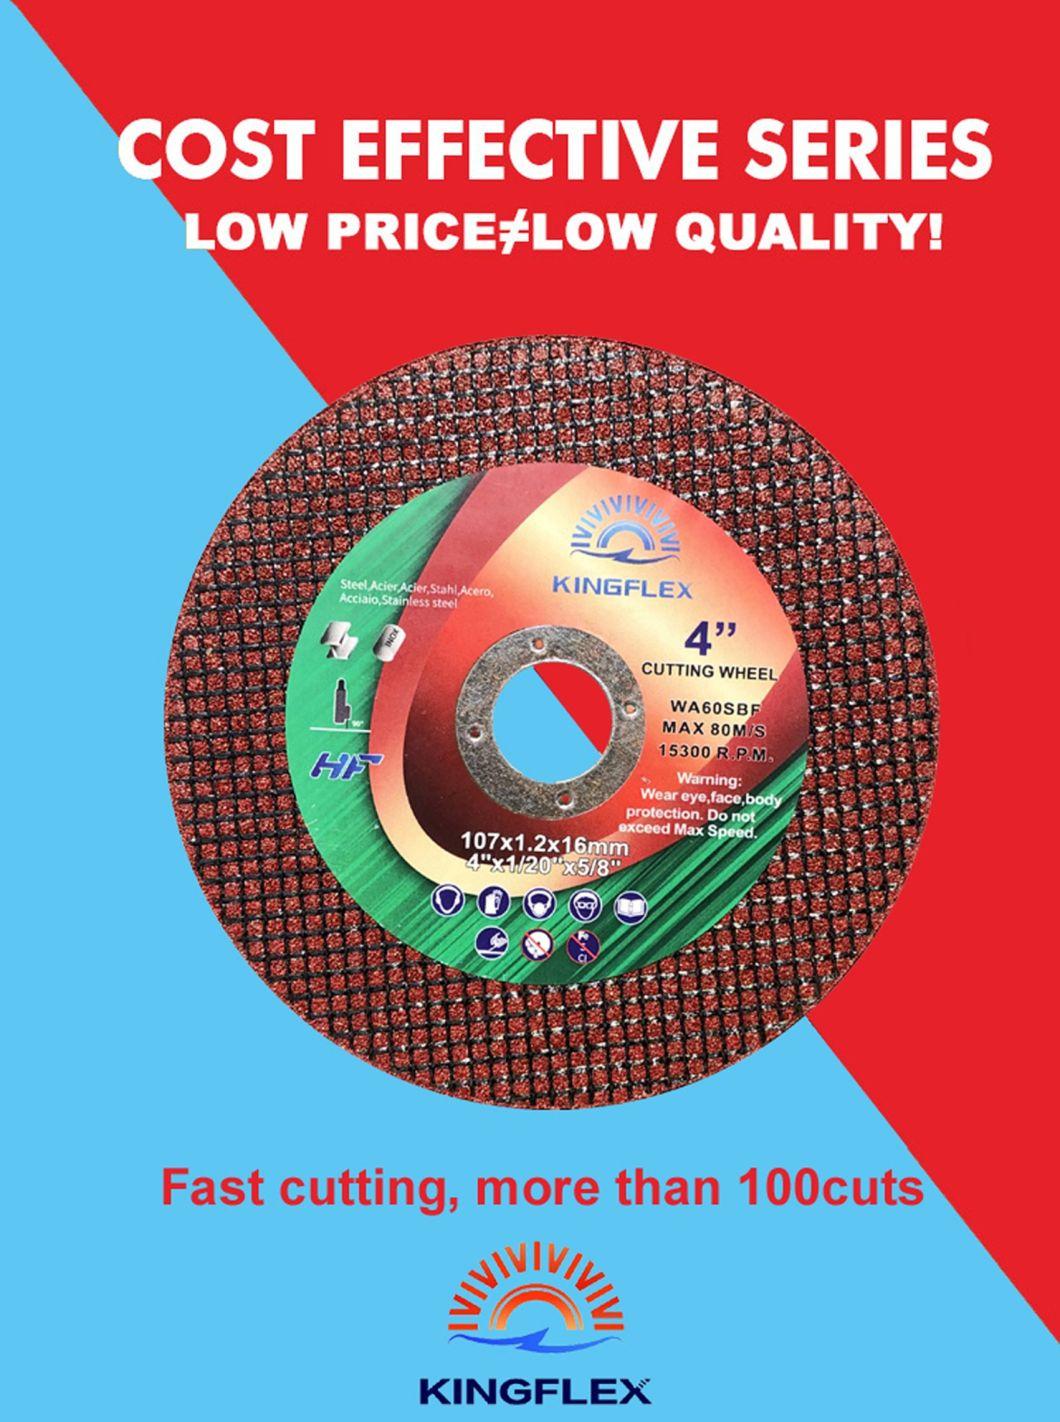 4 Inch Metal Abrasive Cutting Disc for Stainless Steel